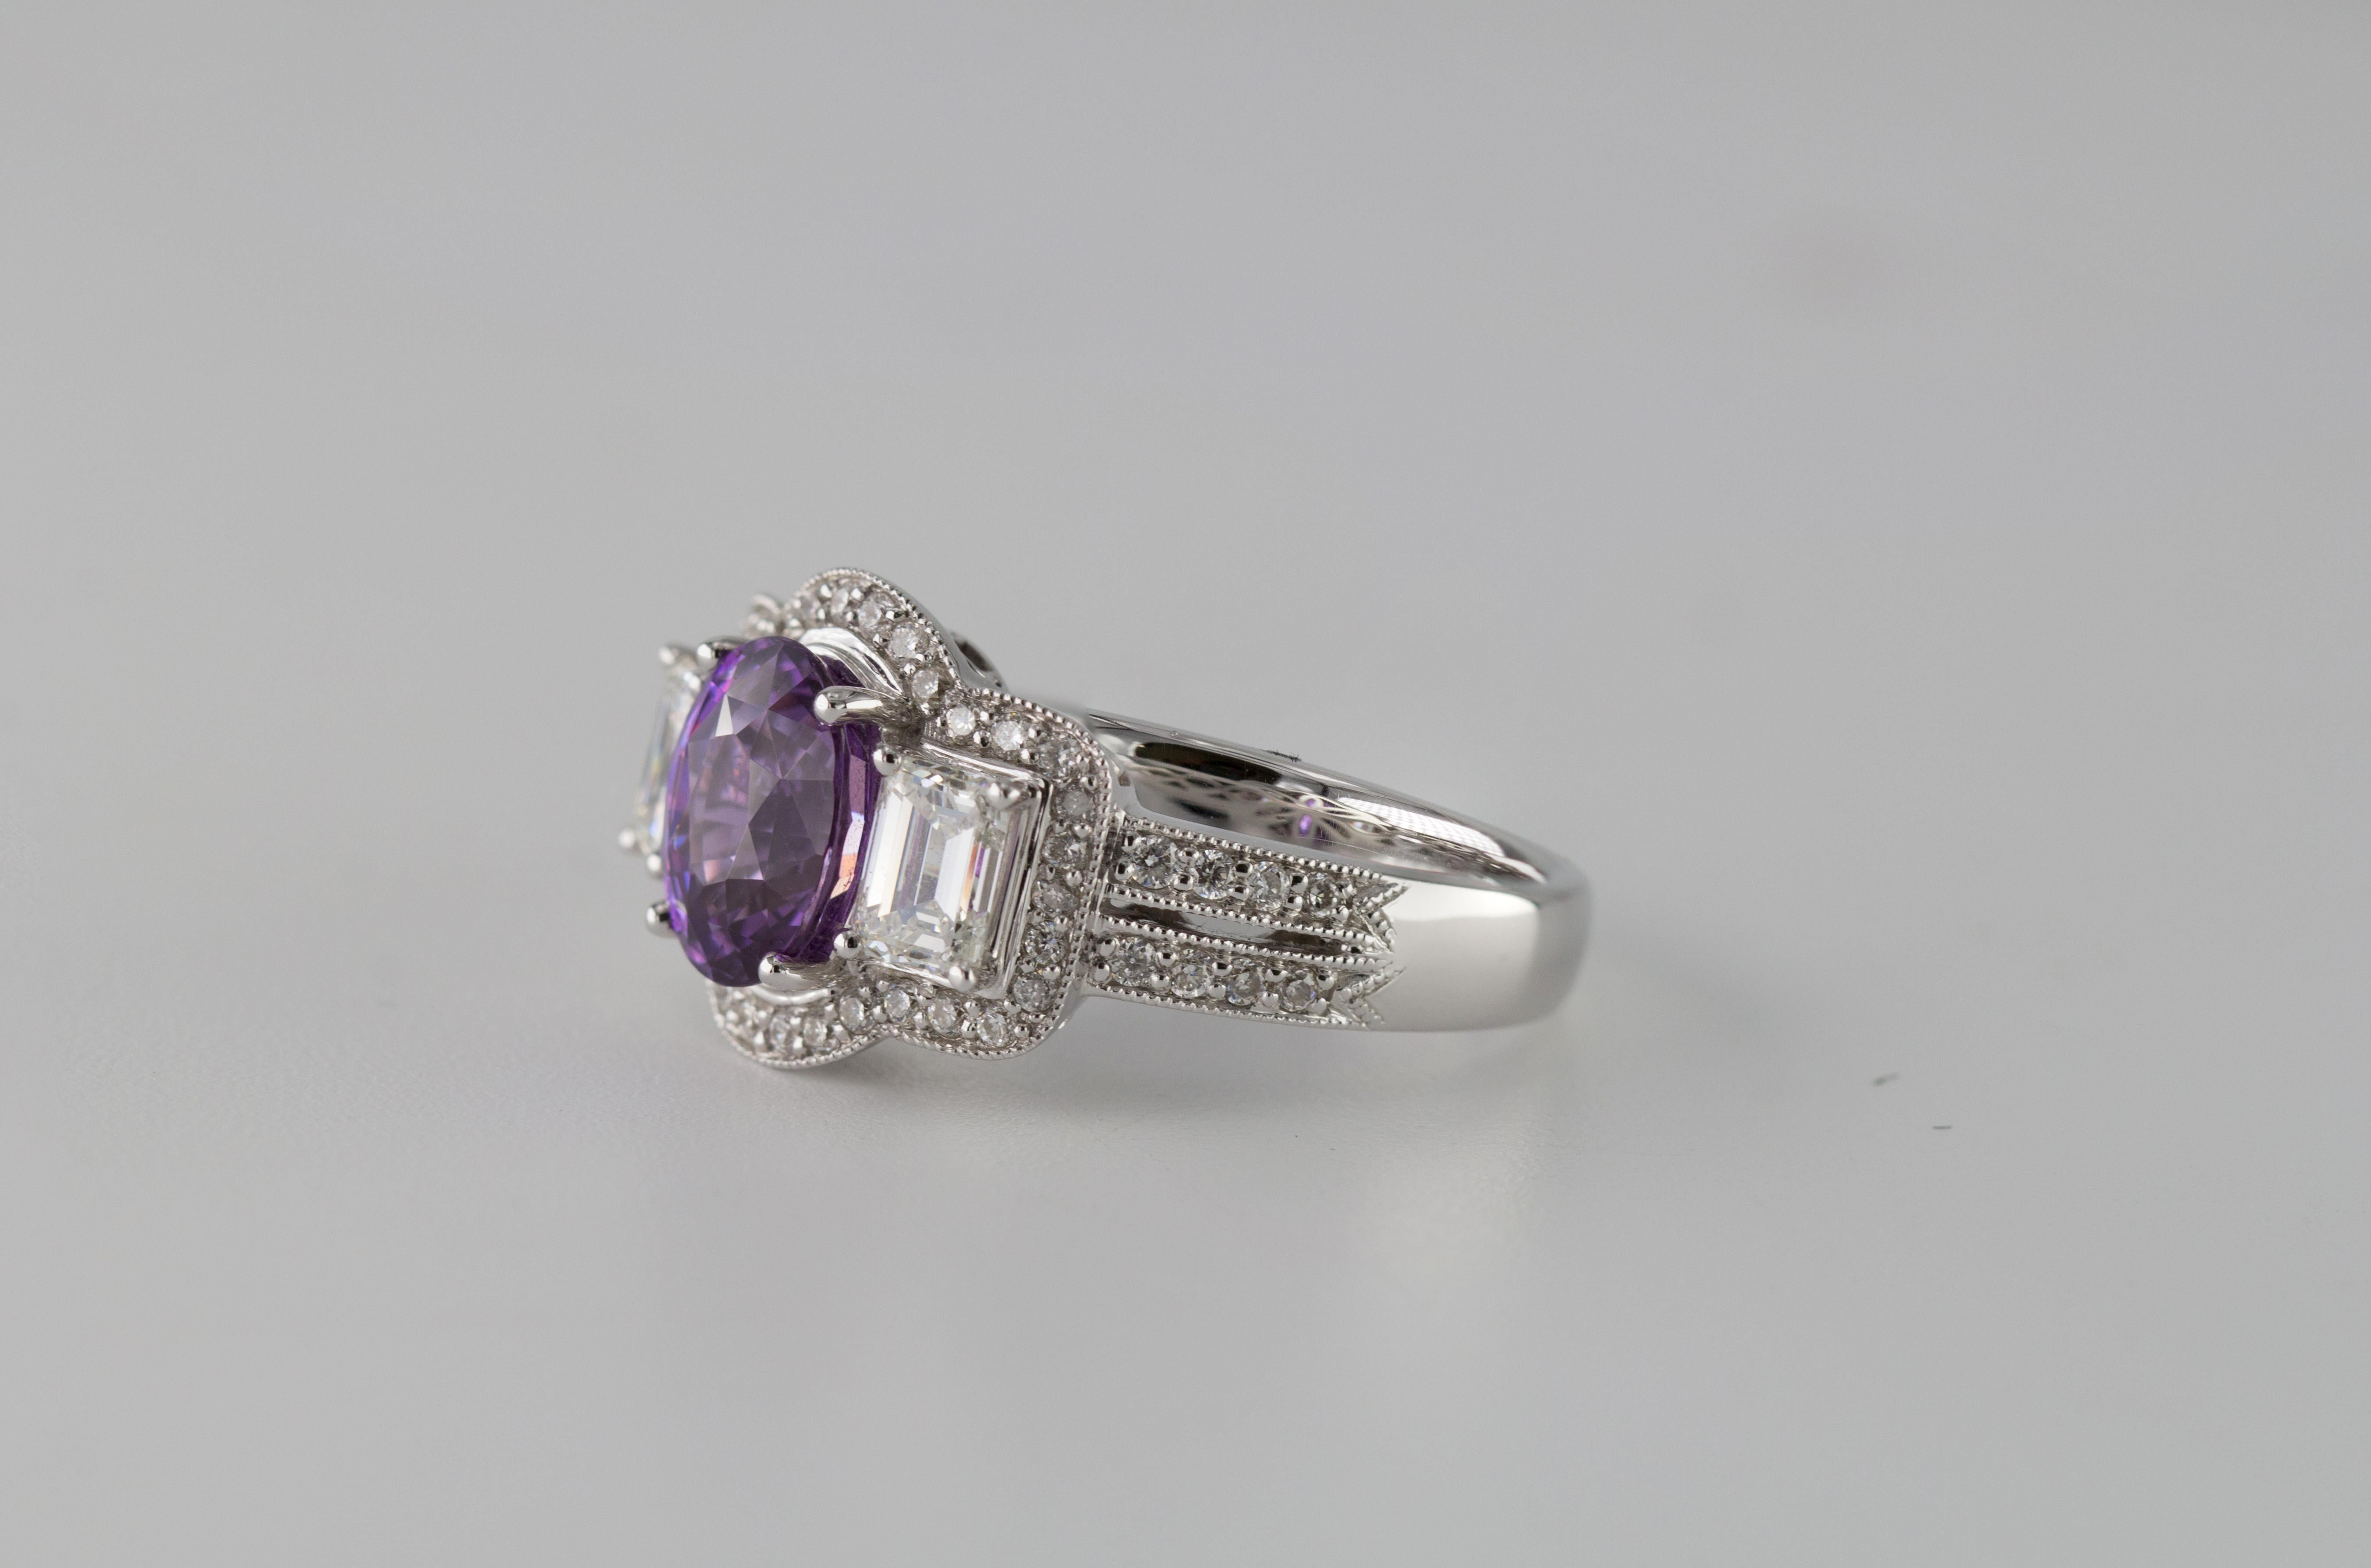 GIA Certified 2.55 Carat Oval Cut Bicolor Madagascar Sapphire Ring ref1122 Neuf - En vente à New York, NY